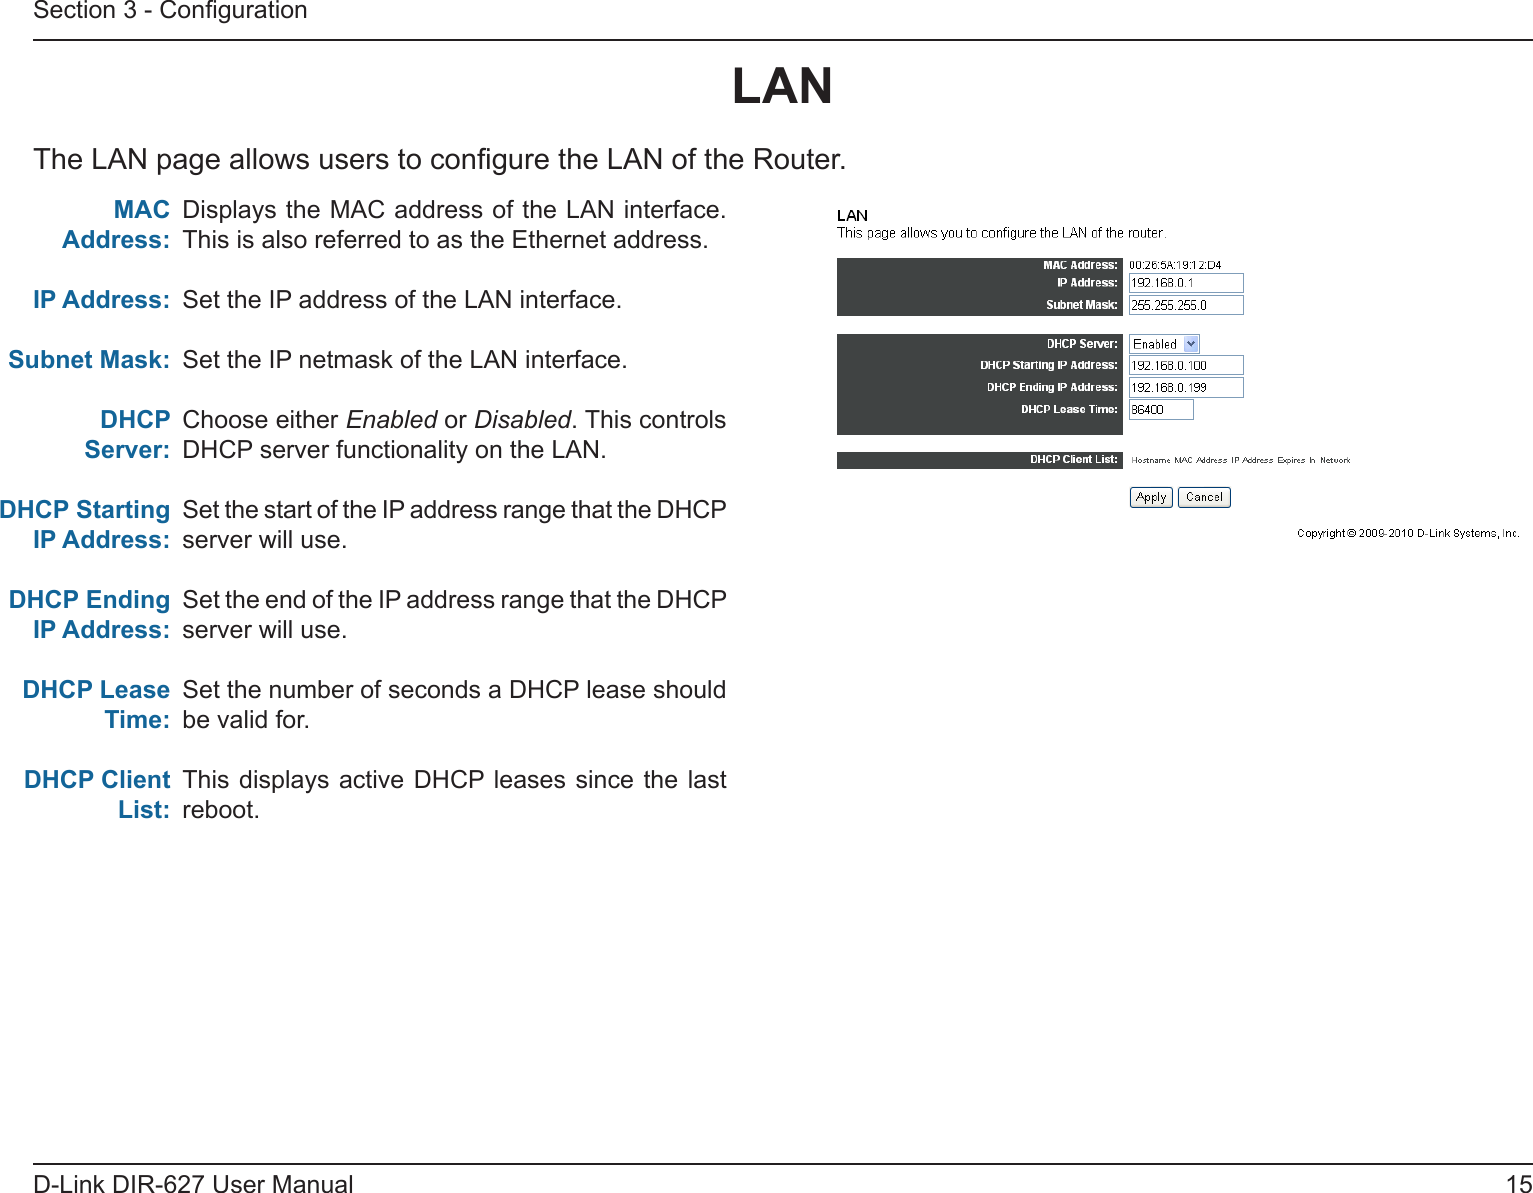 15D-Link DIR-627 User ManualSection 3 - CongurationDisplays the MAC address of the LAN interface. This is also referred to as the Ethernet address.Set the IP address of the LAN interface.Set the IP netmask of the LAN interface.Choose either Enabled or Disabled. This controls DHCP server functionality on the LAN.Set the start of the IP address range that the DHCP server will use.Set the end of the IP address range that the DHCP server will use.Set the number of seconds a DHCP lease should be valid for.This displays active  DHCP leases  since the last reboot.LANThe LAN page allows users to congure the LAN of the Router.MACAddress:IPAddress:SubnetMask:DHCPServer:DHCPStartingIPAddress:DHCPEndingIPAddress:DHCPLeaseTime:DHCPClientList: